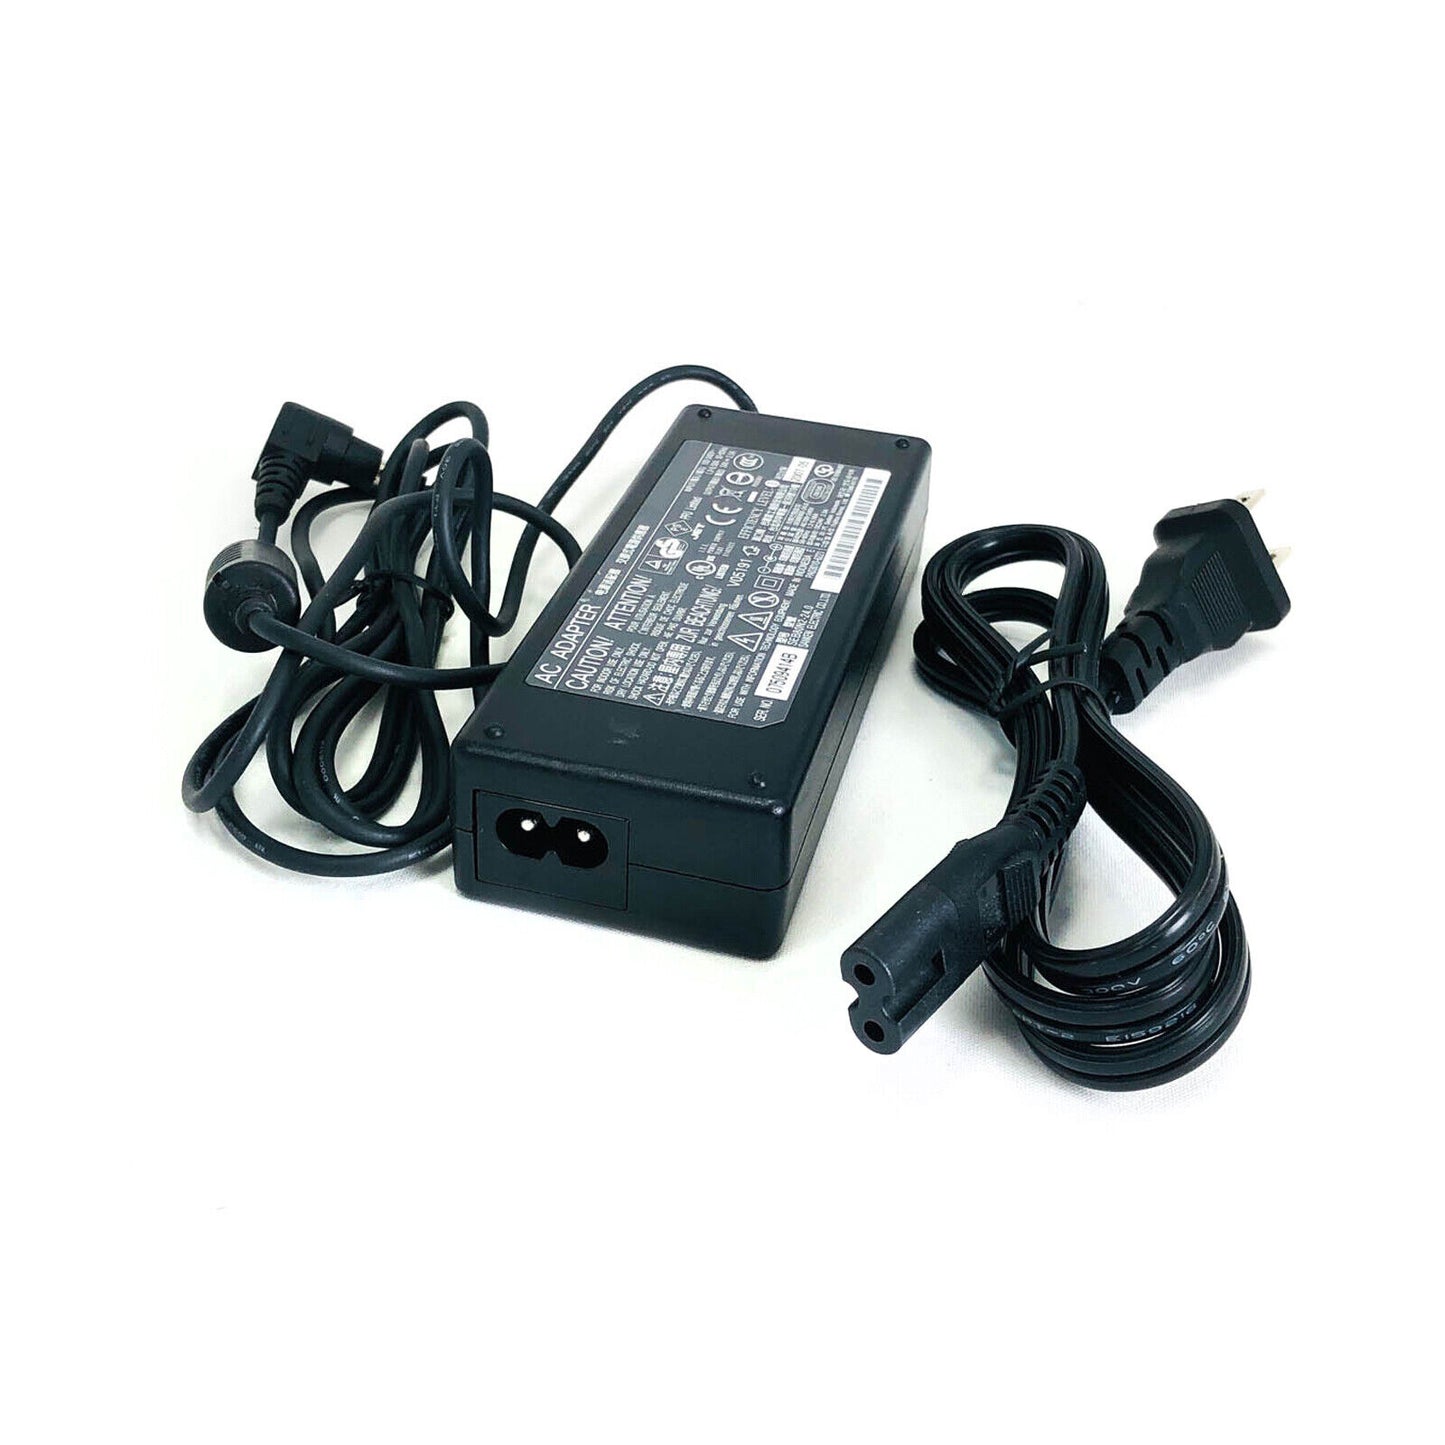 Genuine AC Charger Adapter for Fujitsu Image Scanner FI-Series w/PC